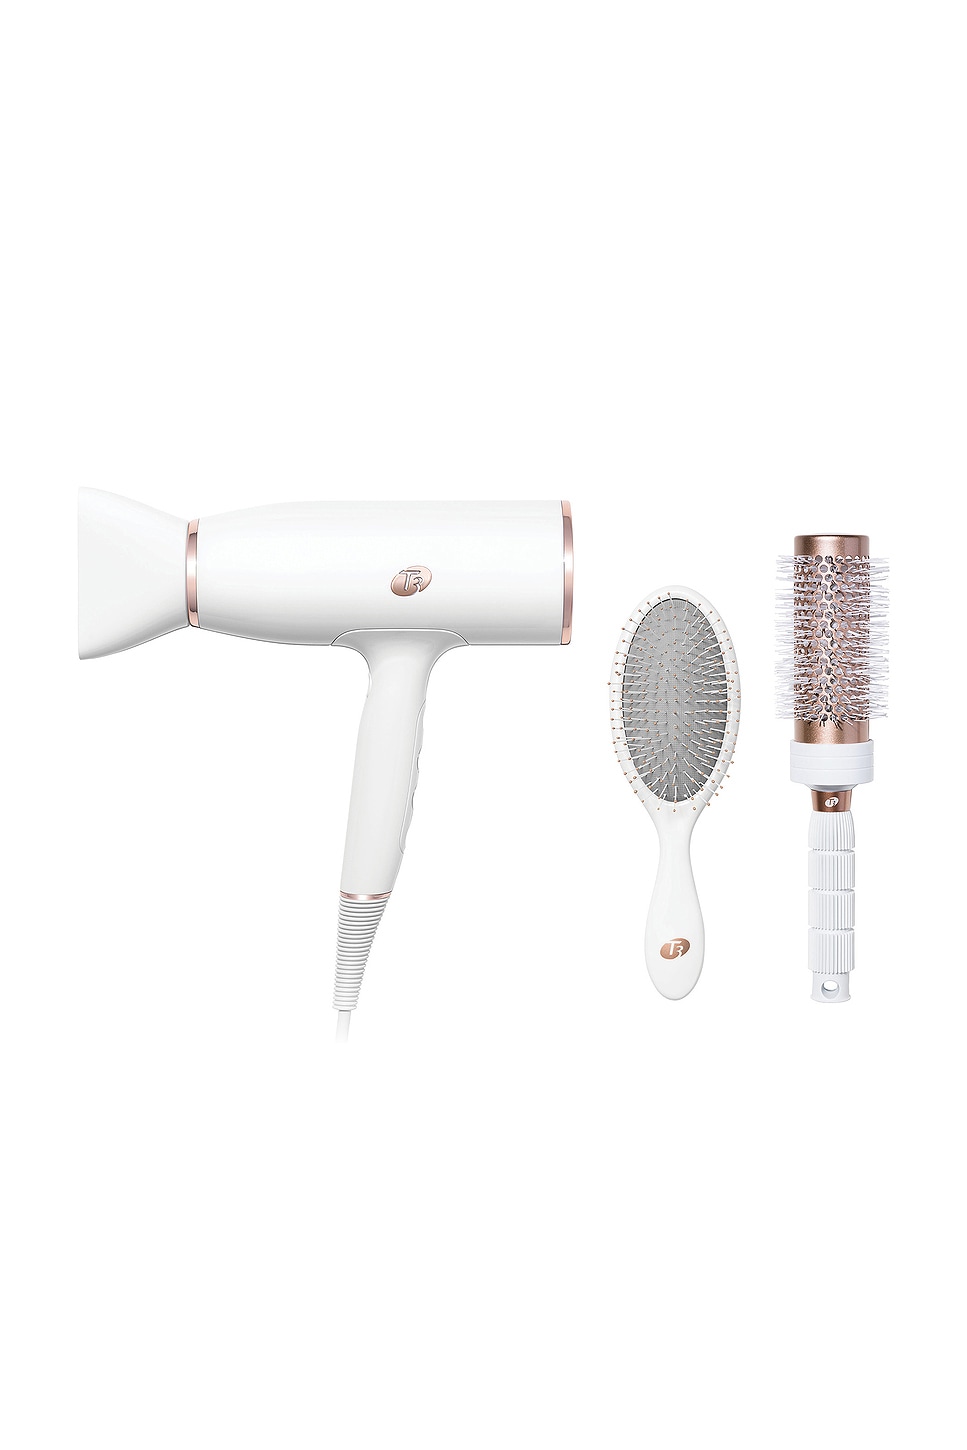 Aireluxe Professional Hair Dryer & Brush Set in Beauty: NA